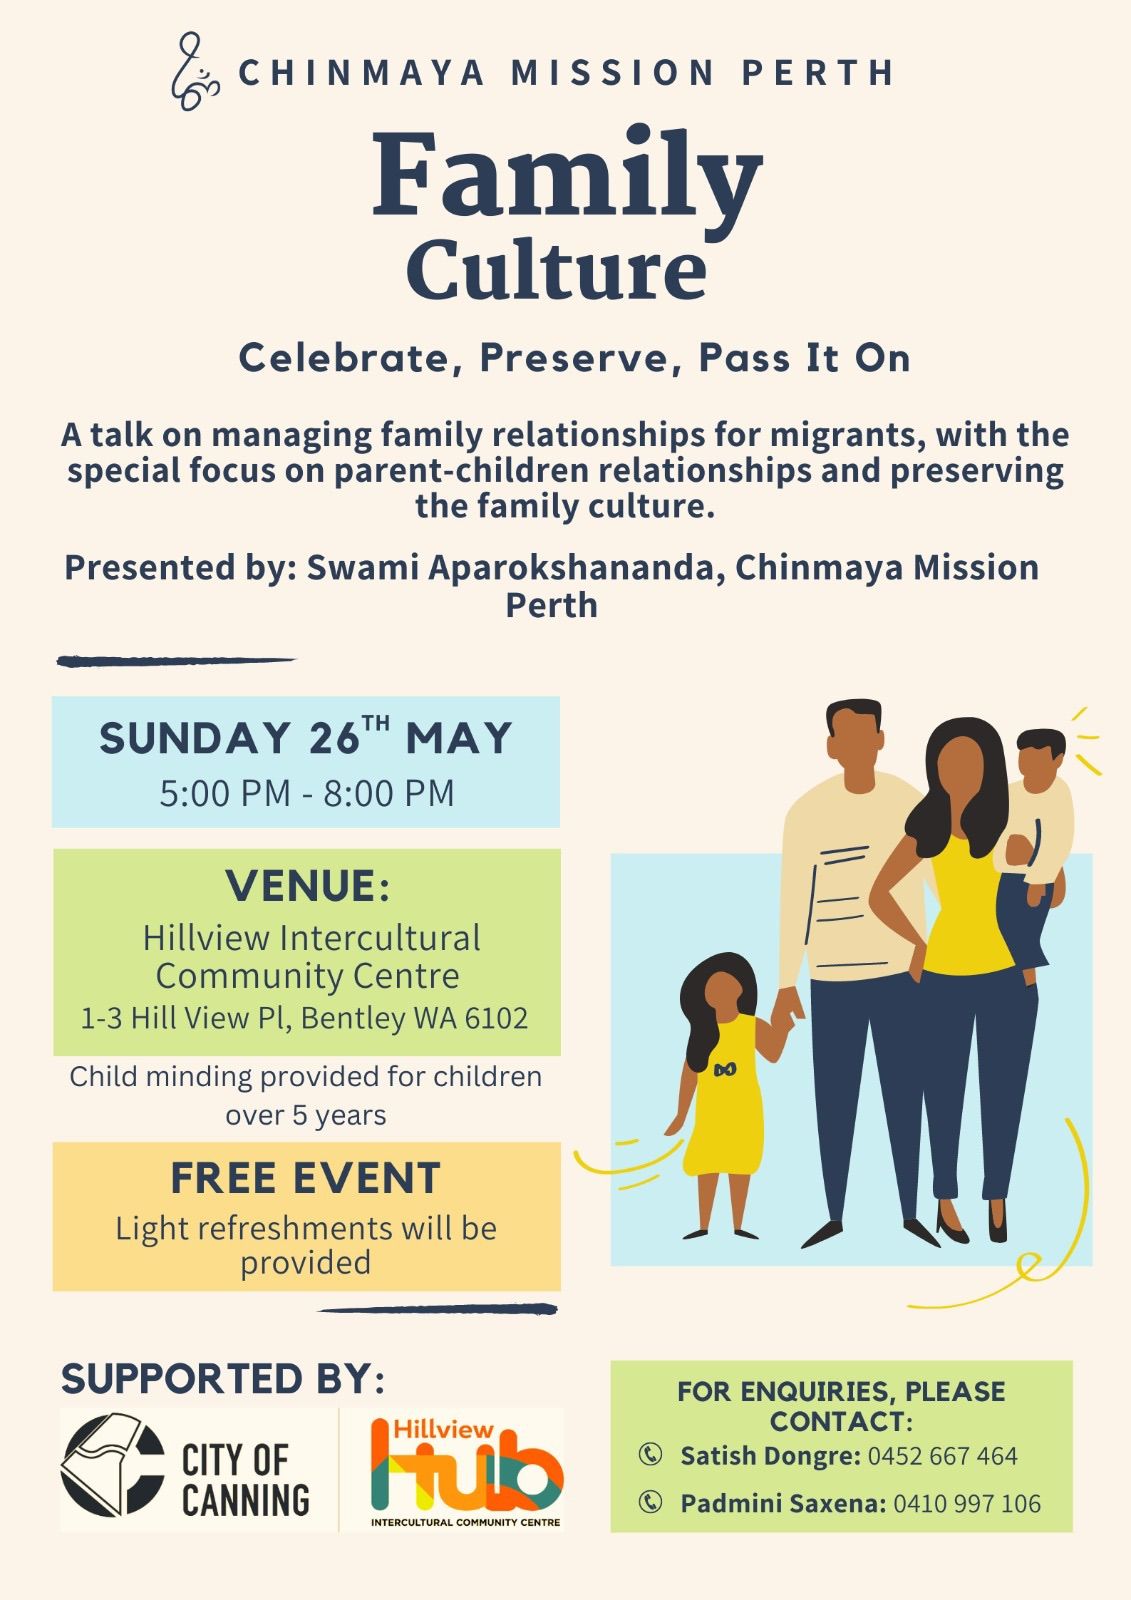 Family Culture - A talk on managing family relationships for migrants.